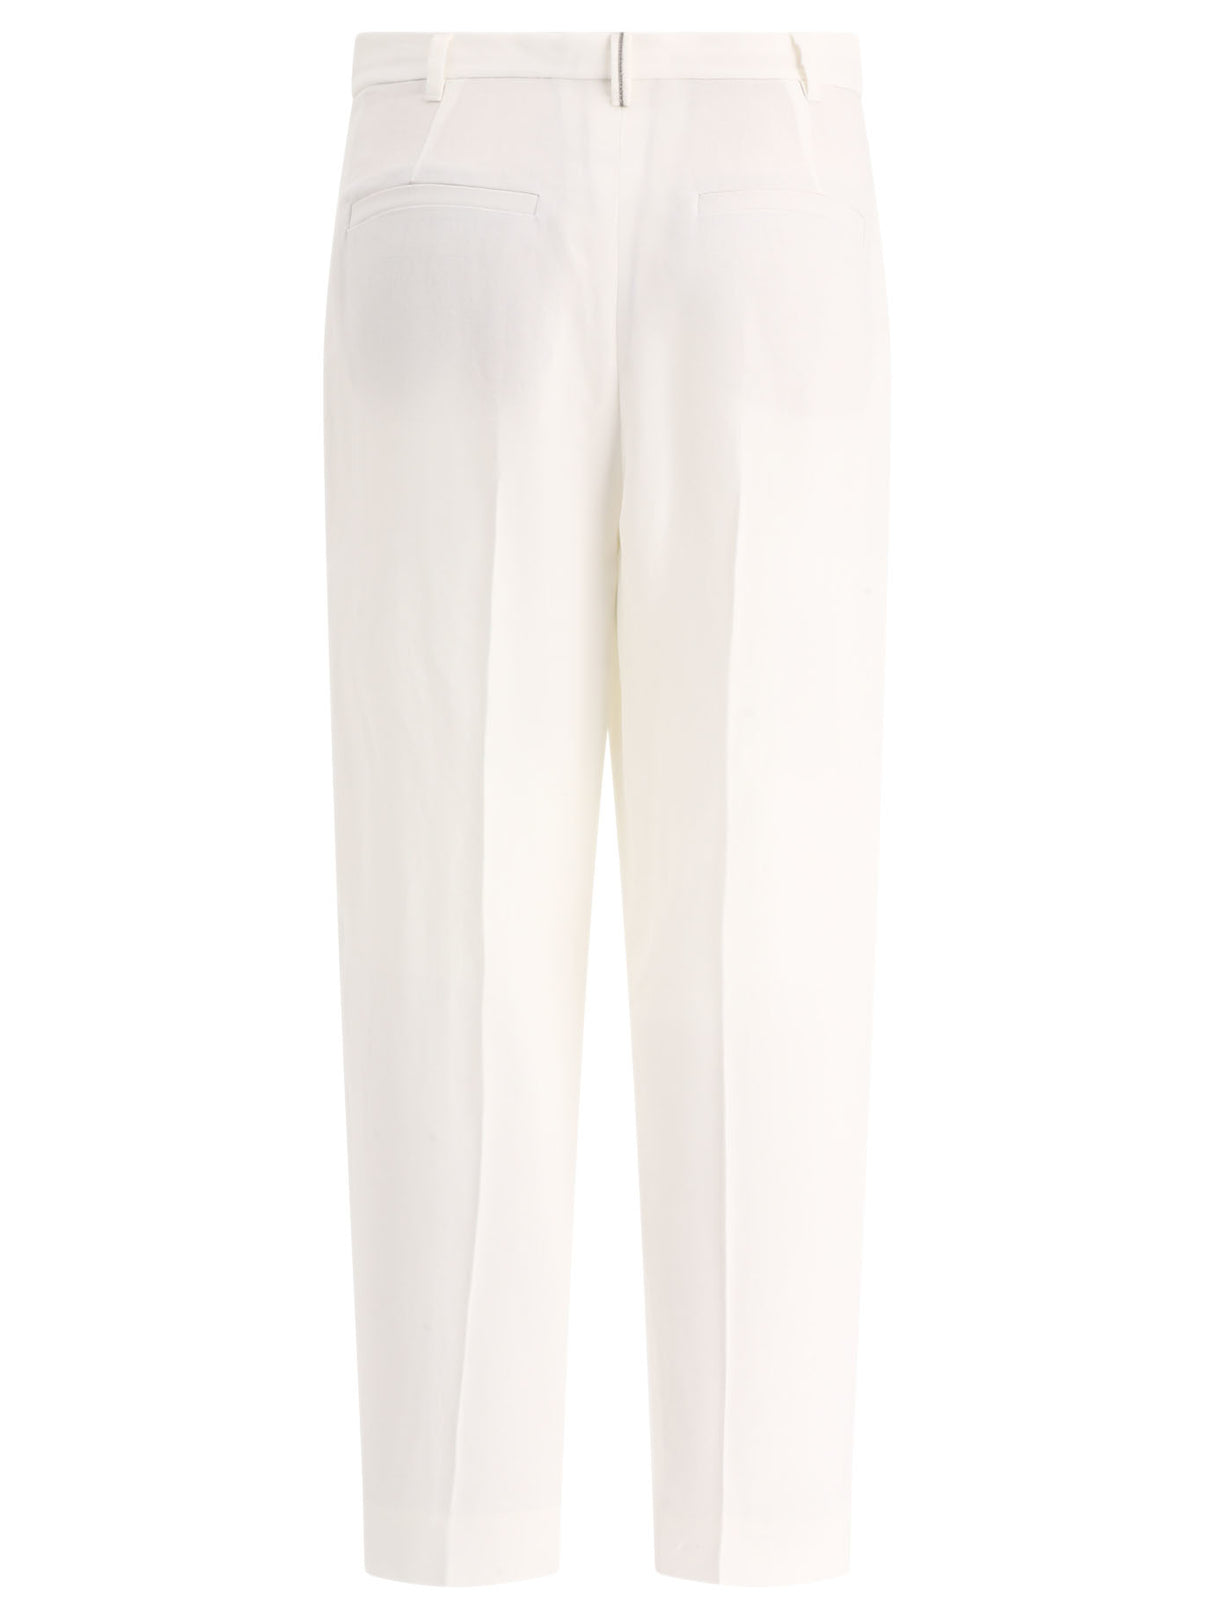 White Slouchy Trousers with Double Pleat and Monili Decoration